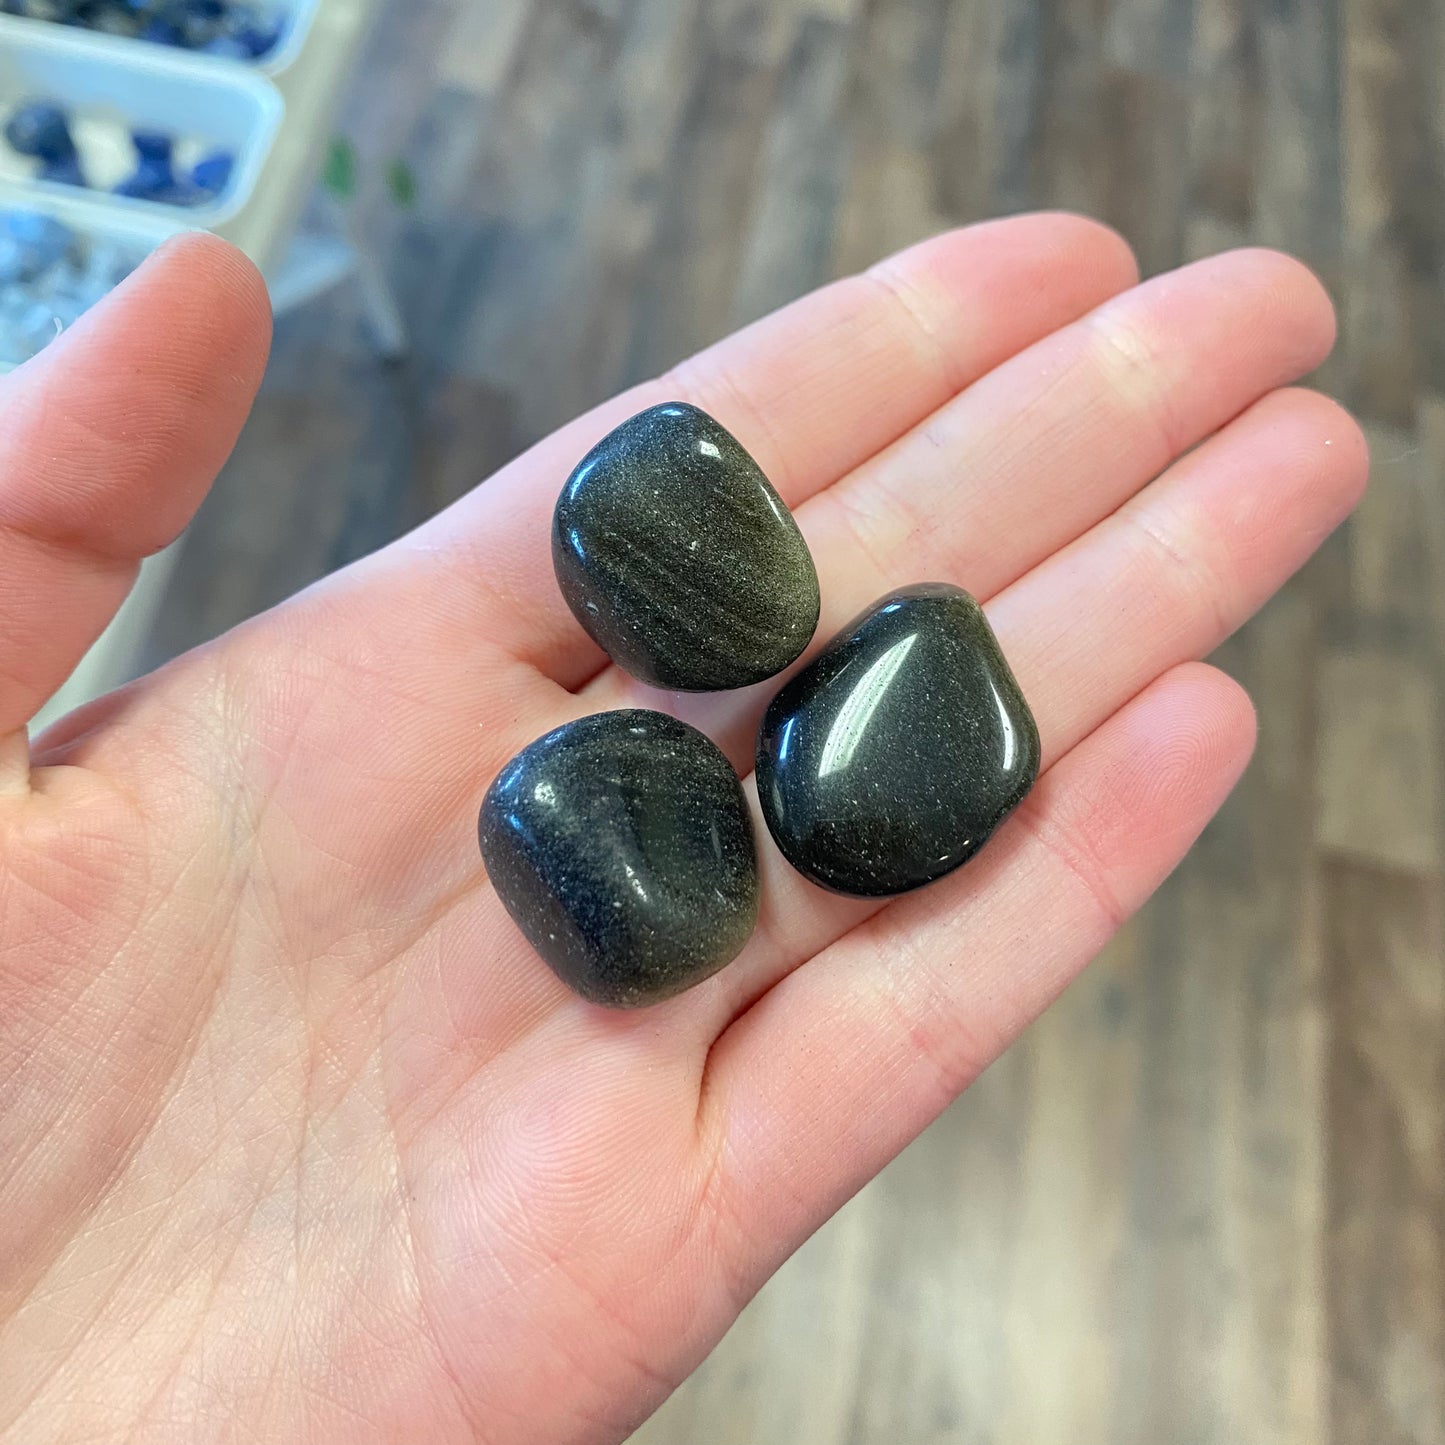 Gold Sheen Obsidian (Personal Power) Tumbled